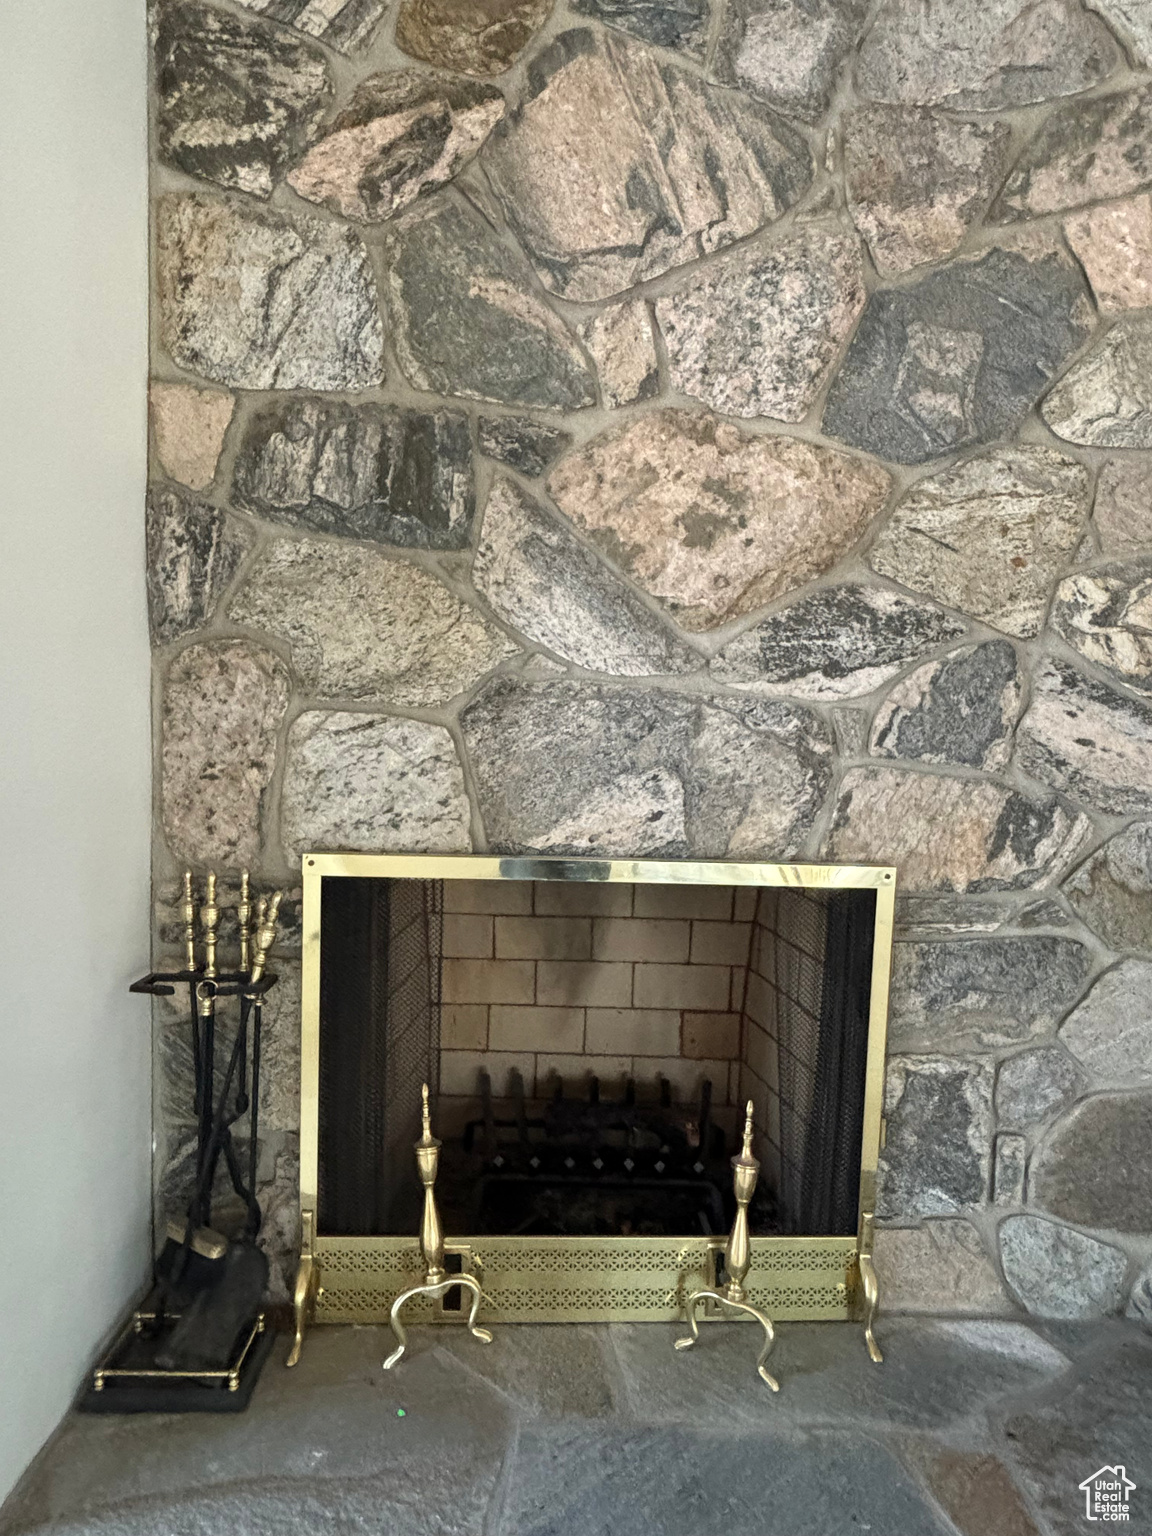 BEAUTIFUL FIREPLACE IN THE UPSTAIRS FAMILY ROOM!